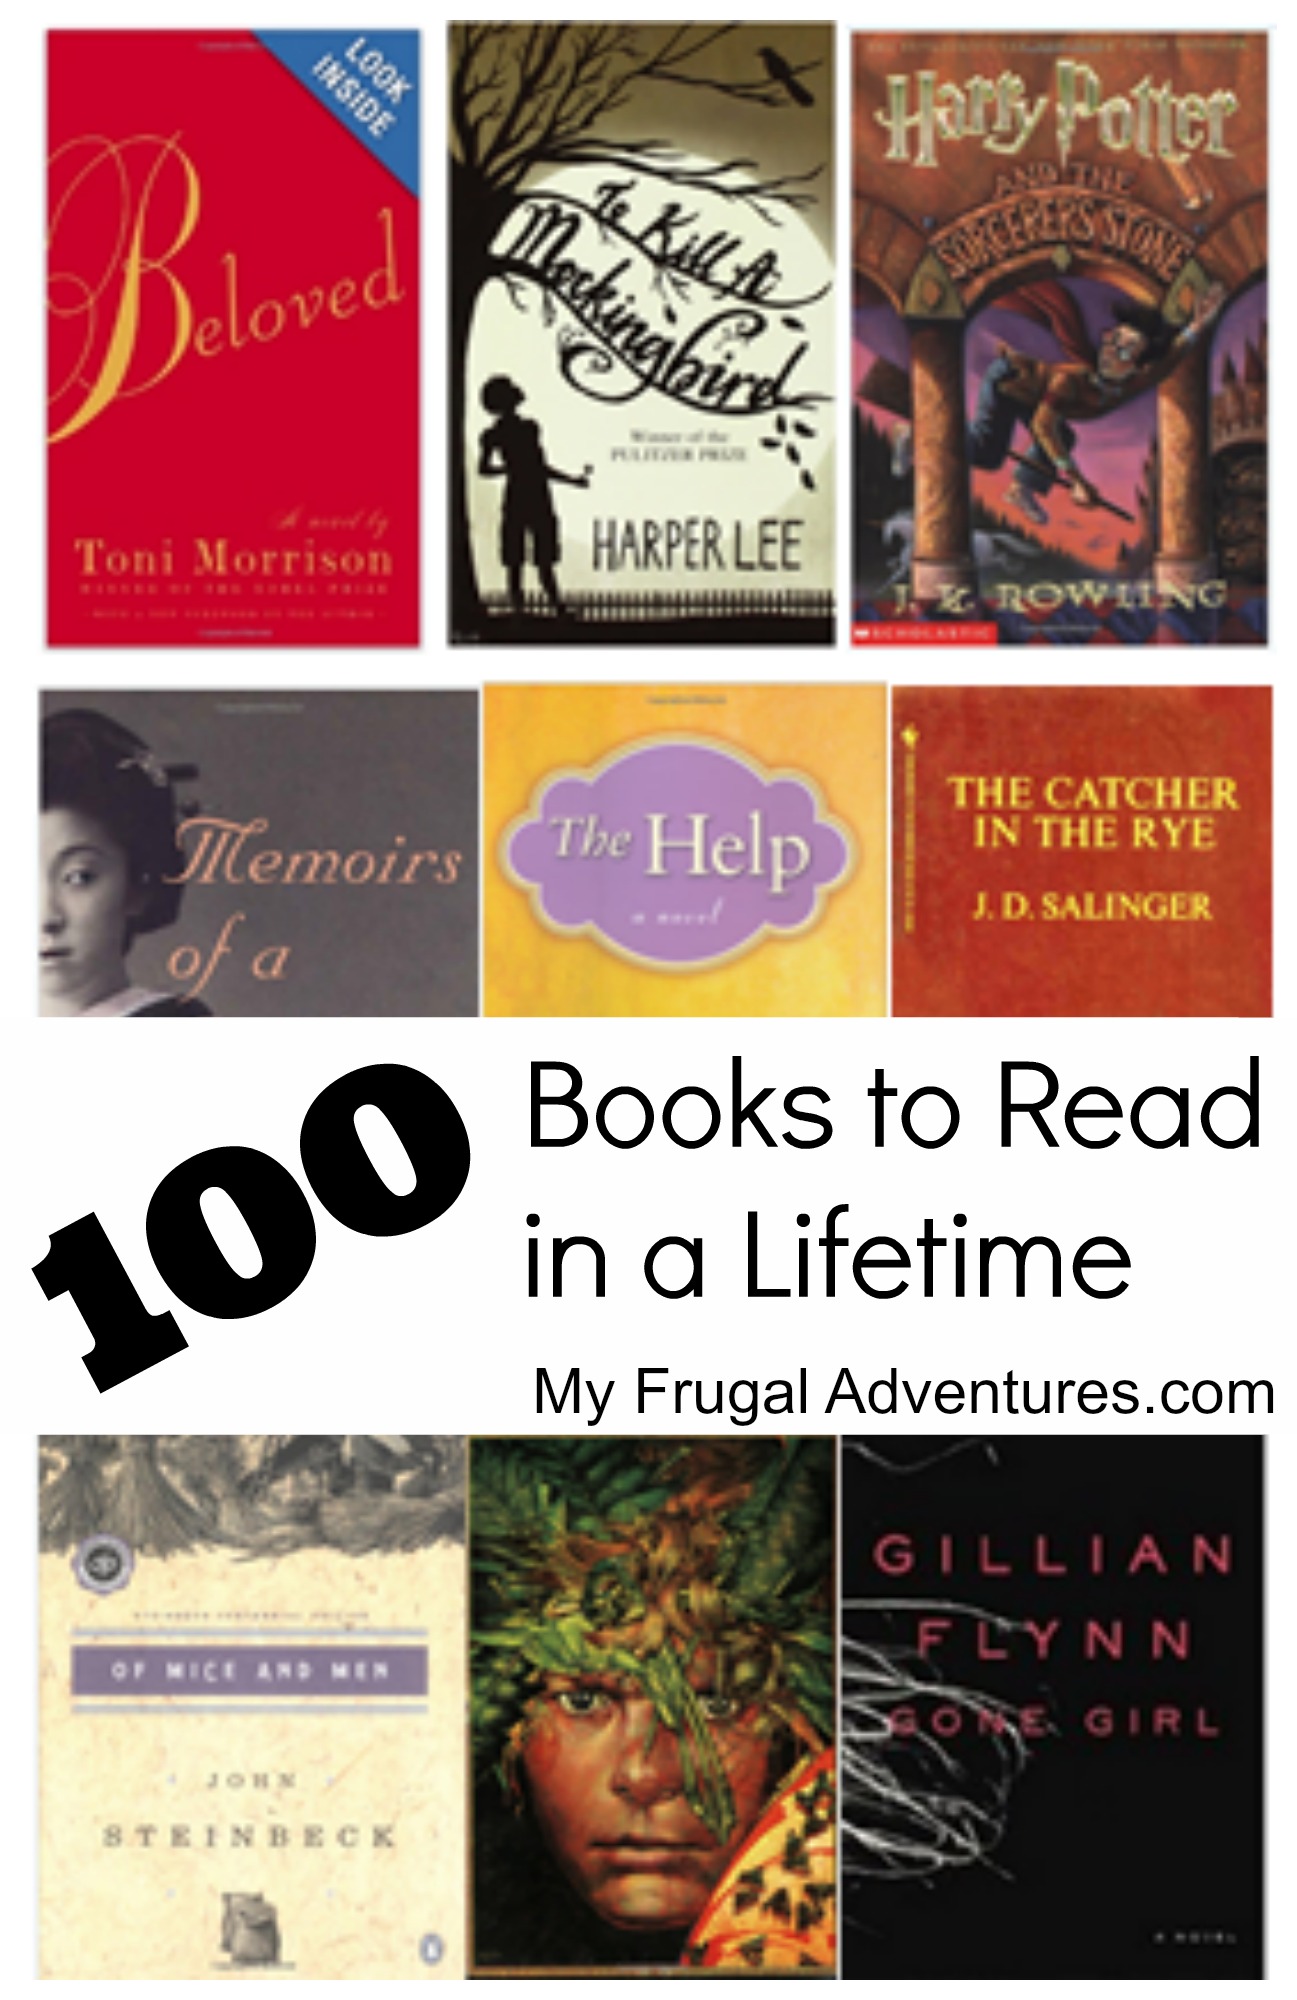 100-amazing-books-to-read-in-a-lifetime-my-frugal-adventures